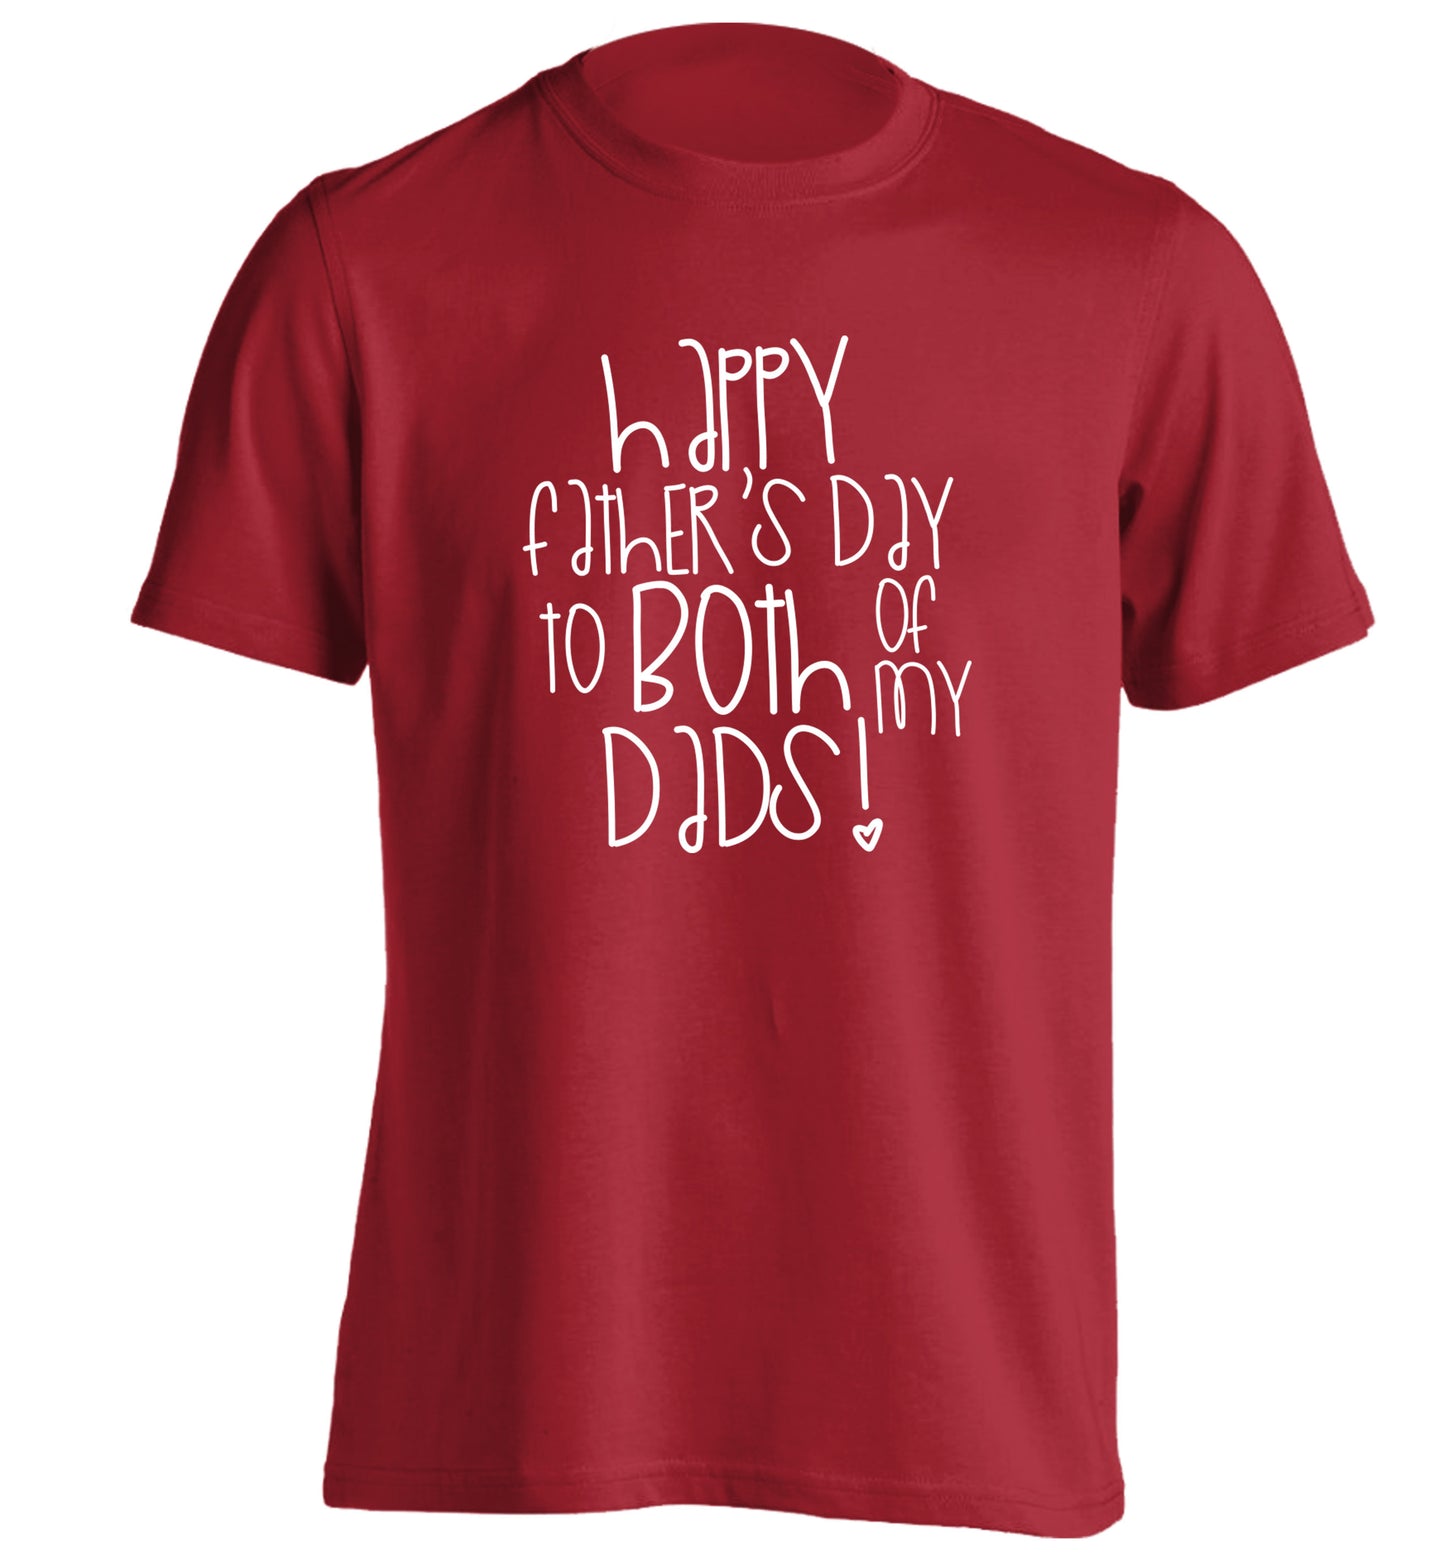 Happy father's day to both of my dads adults unisex red Tshirt 2XL